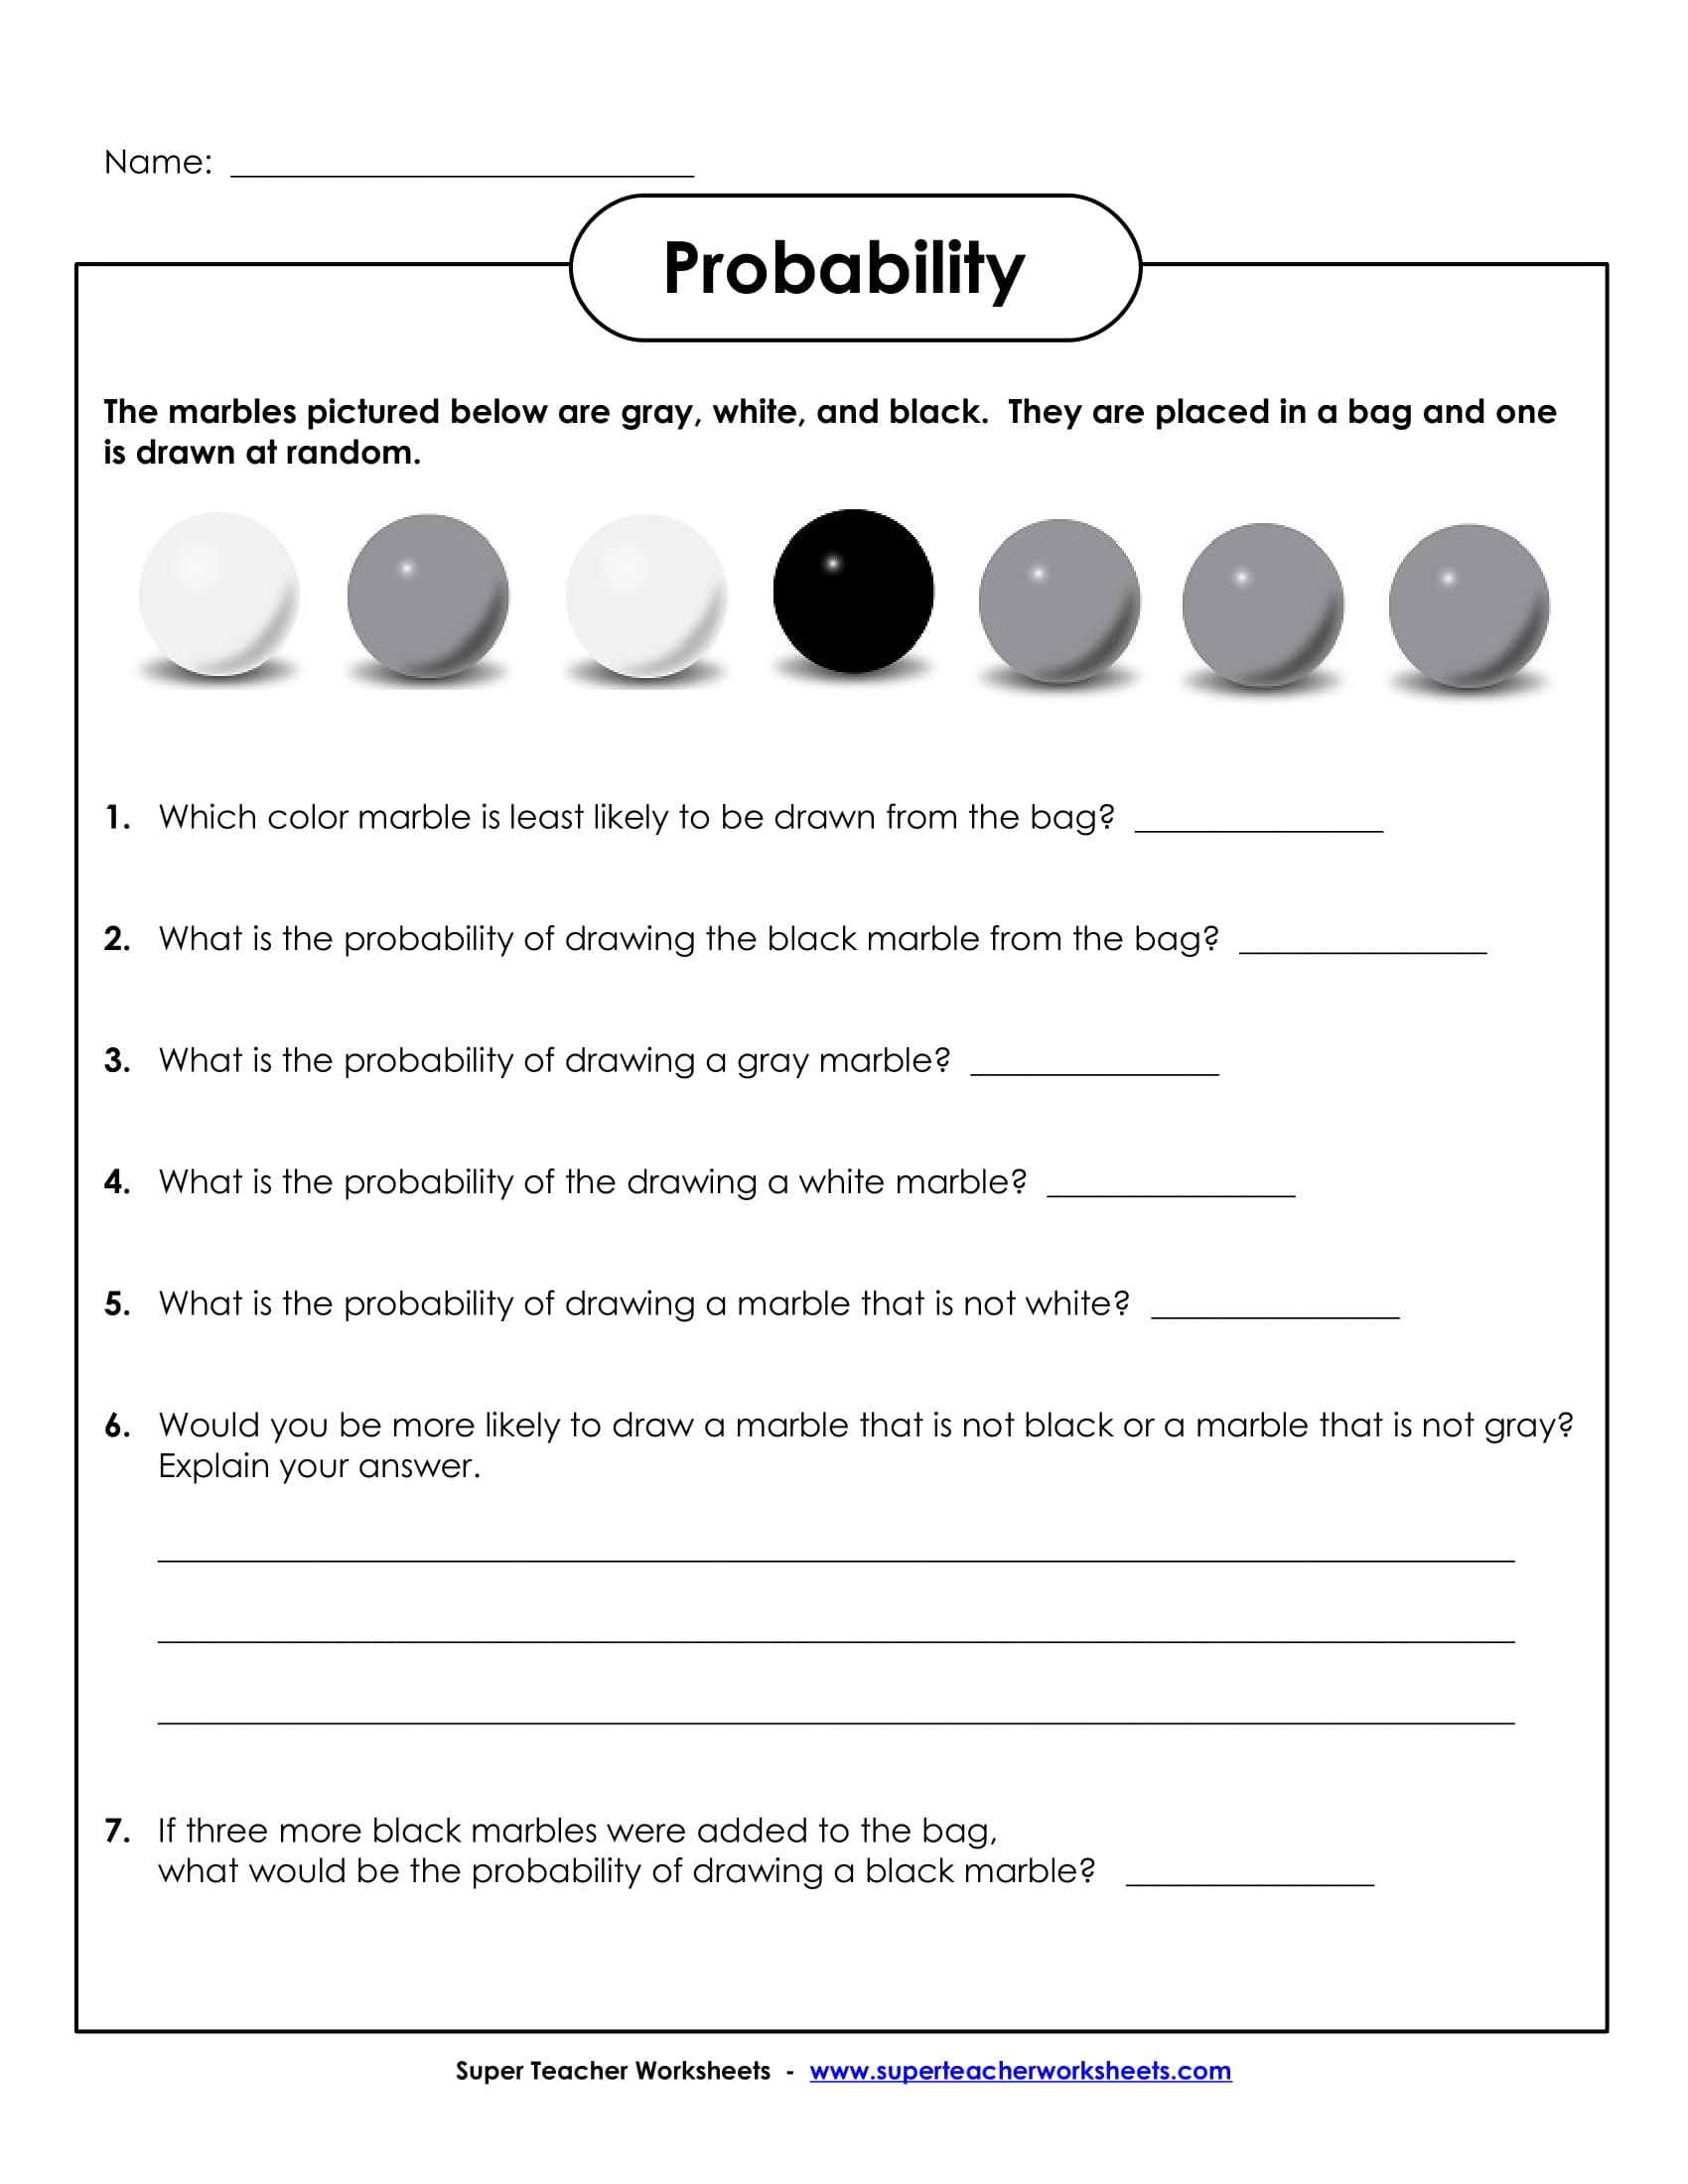 practice problems for probability